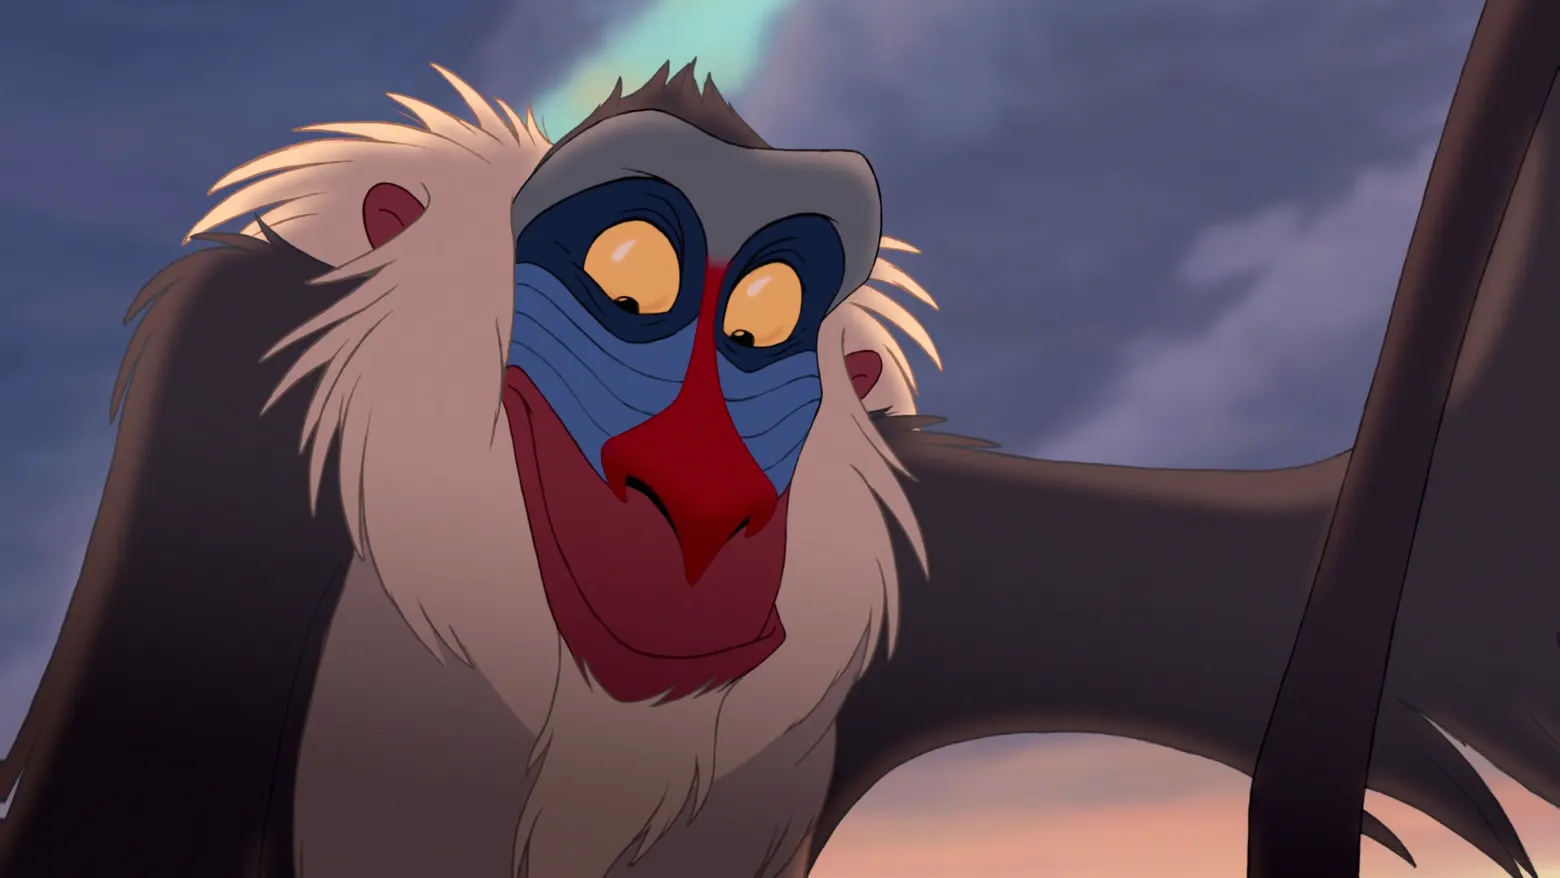 A scene from Lion King